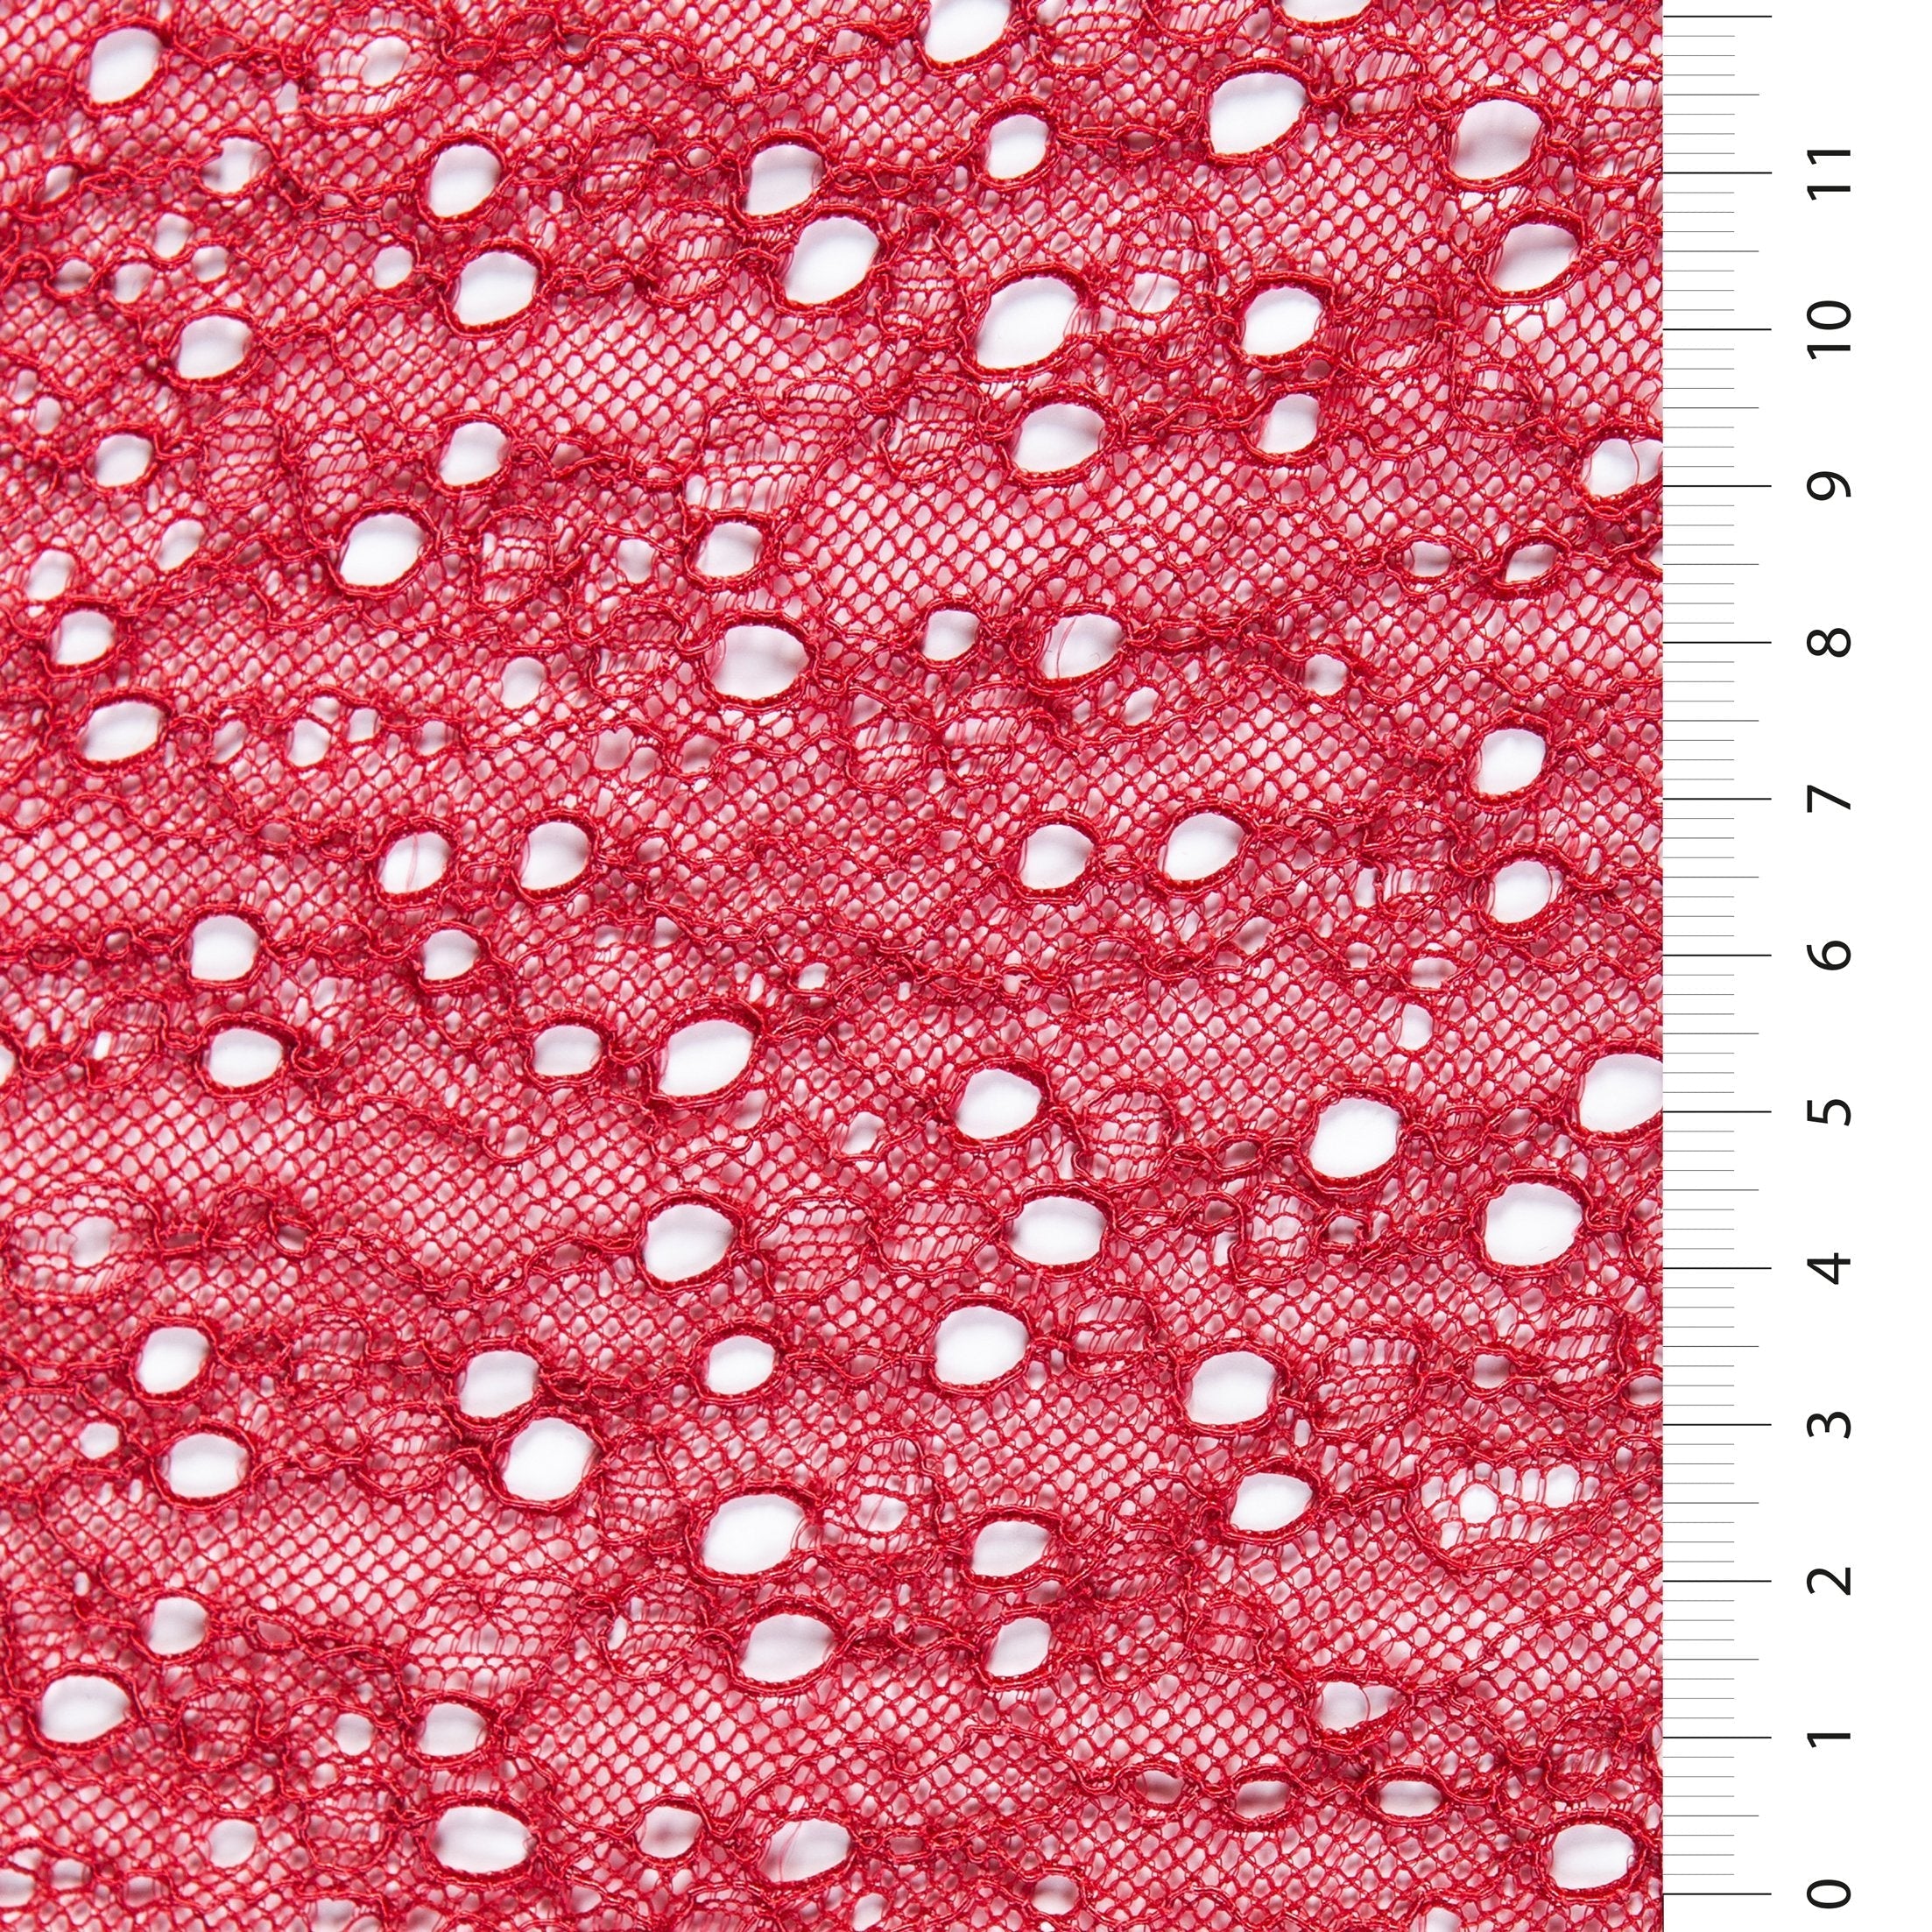 Lace Fabric with Raindrop Design